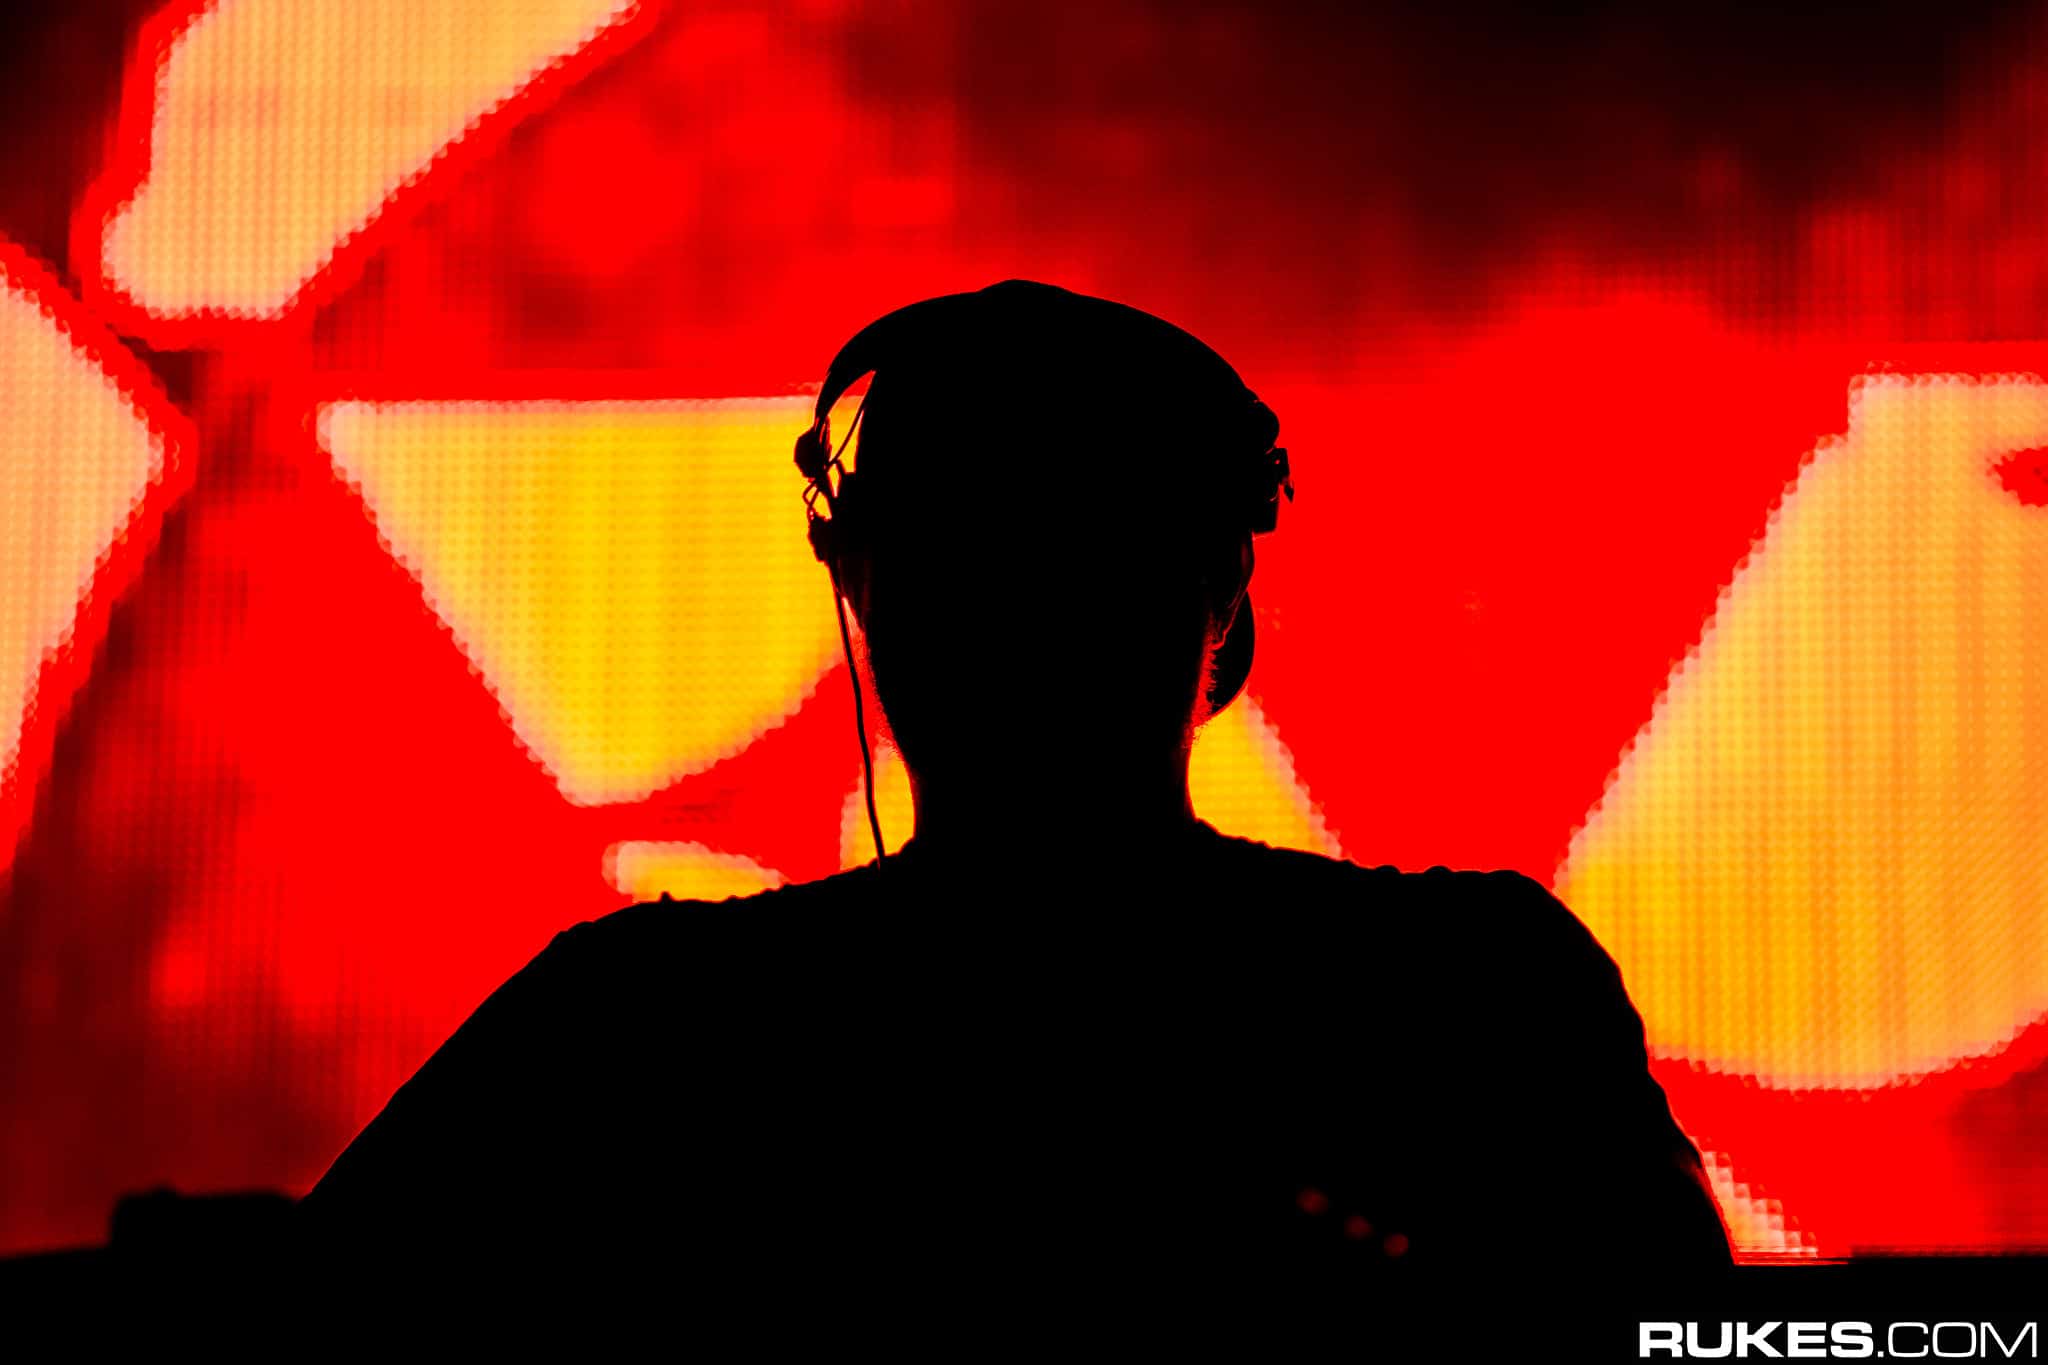 Eric Prydz teases latest Pryda Presents release courtesy of Charles D